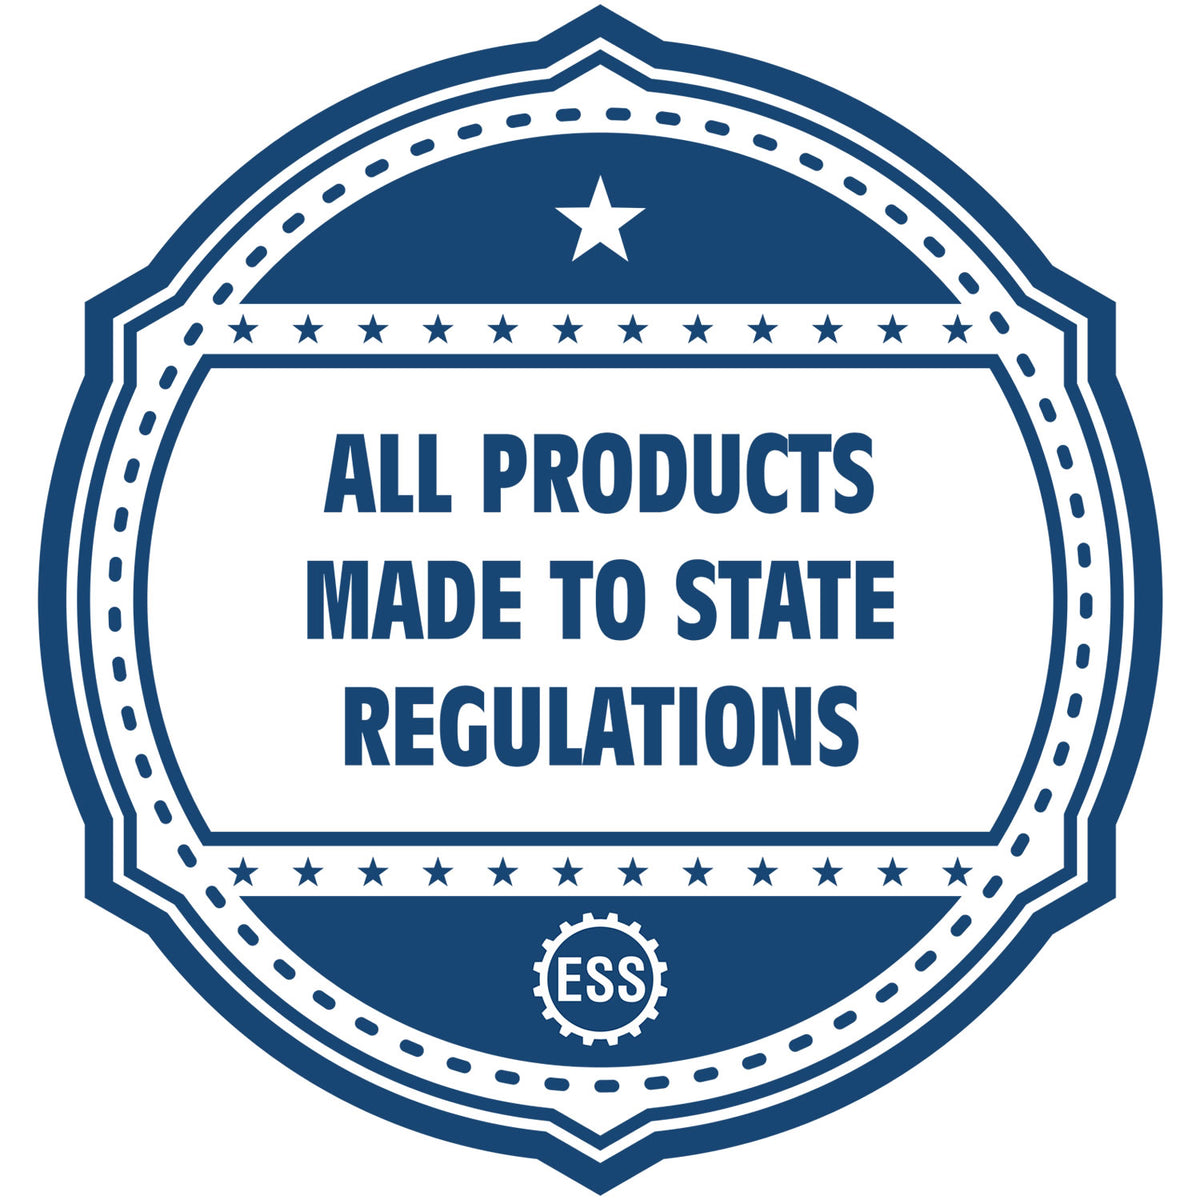 An icon or badge element for the MaxLight Premium Pre-Inked Mississippi State Seal Notarial Stamp showing that this product is made in compliance with state regulations.